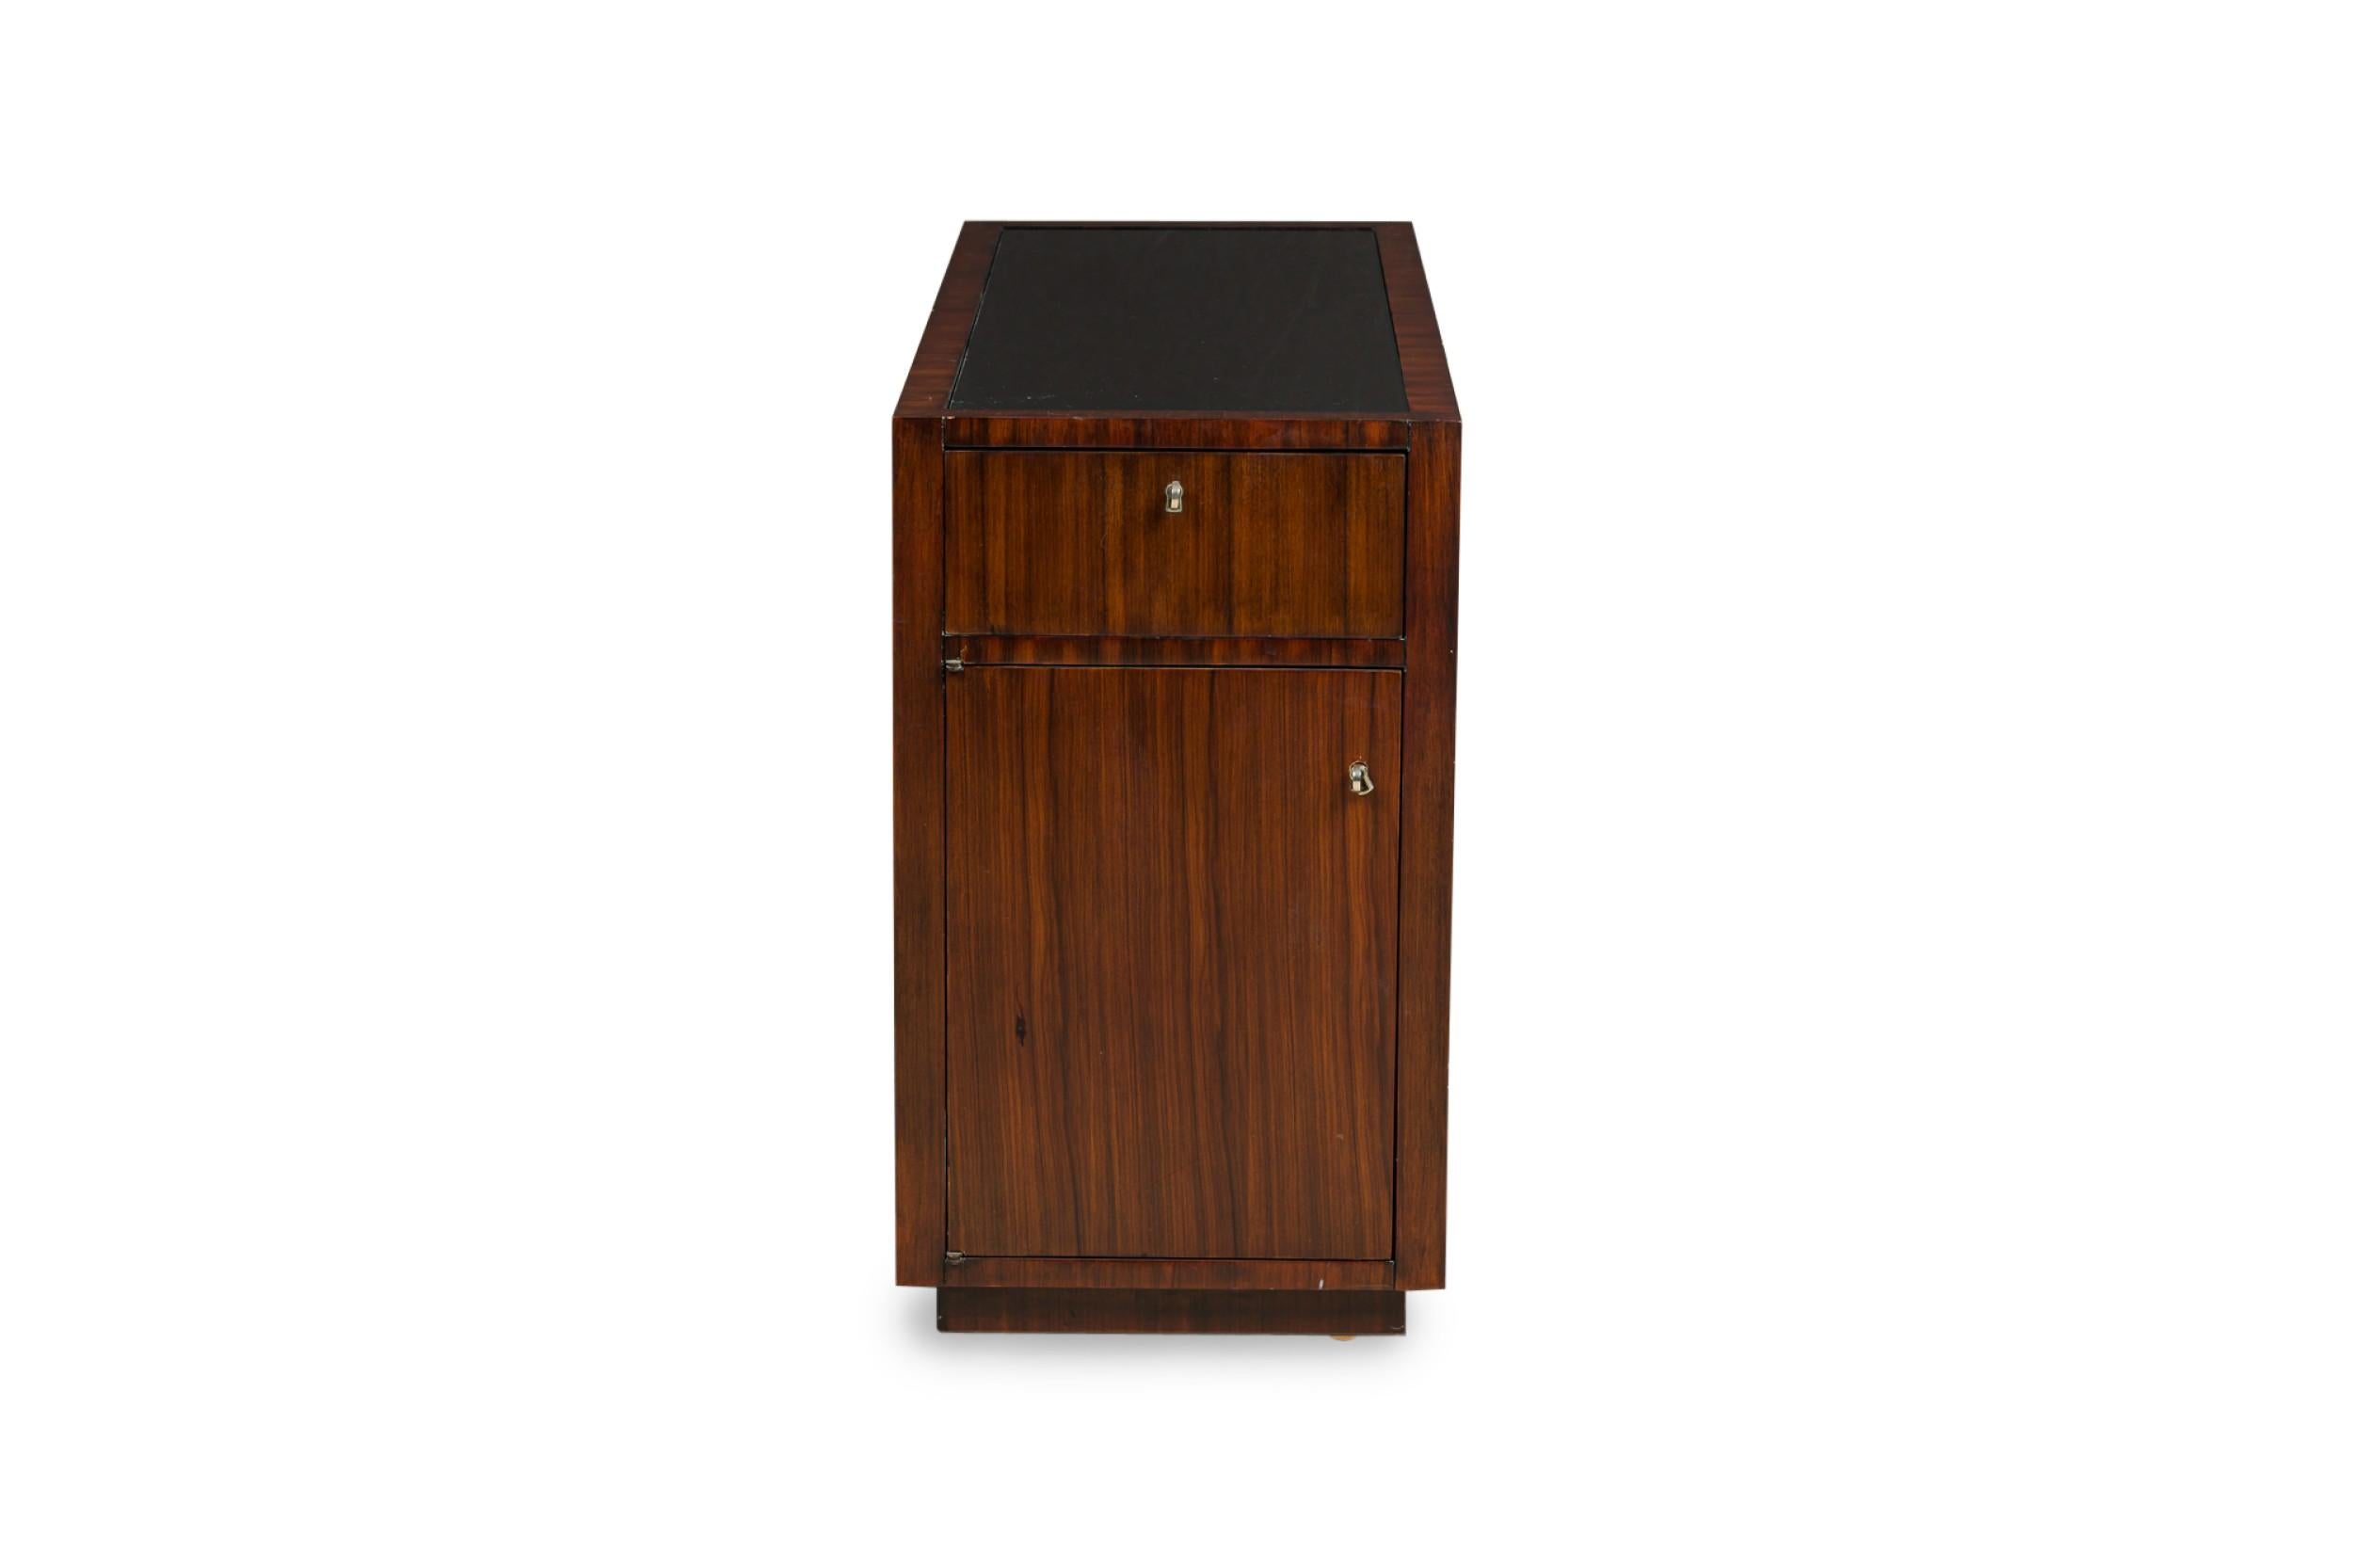 PAIR of Art Deco Style Mid-Century American ebony de macassar cabinets featuring an open front storage area with one shelf plus a pullout drawer and compartment on the left side. One cabinet has an inlaid glass top. (PRICED AS PAIR)
 

 1 glass top